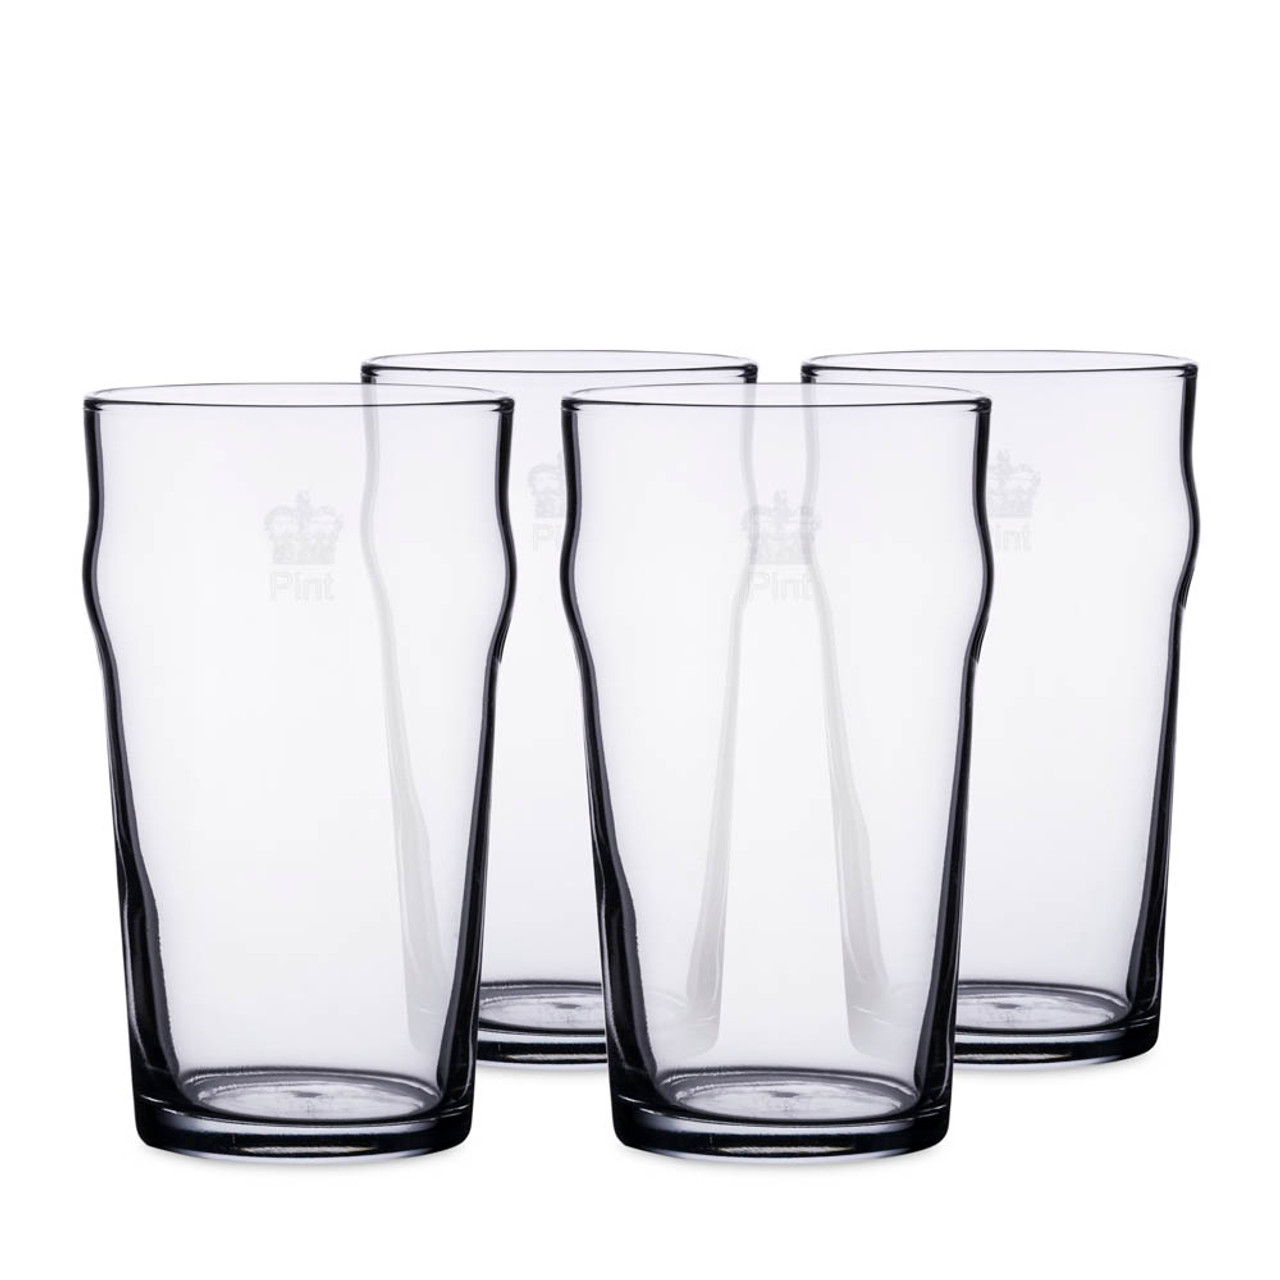 Mix or Match Pint Glasses Beer Glasses Set of 6 Gifts for Men 